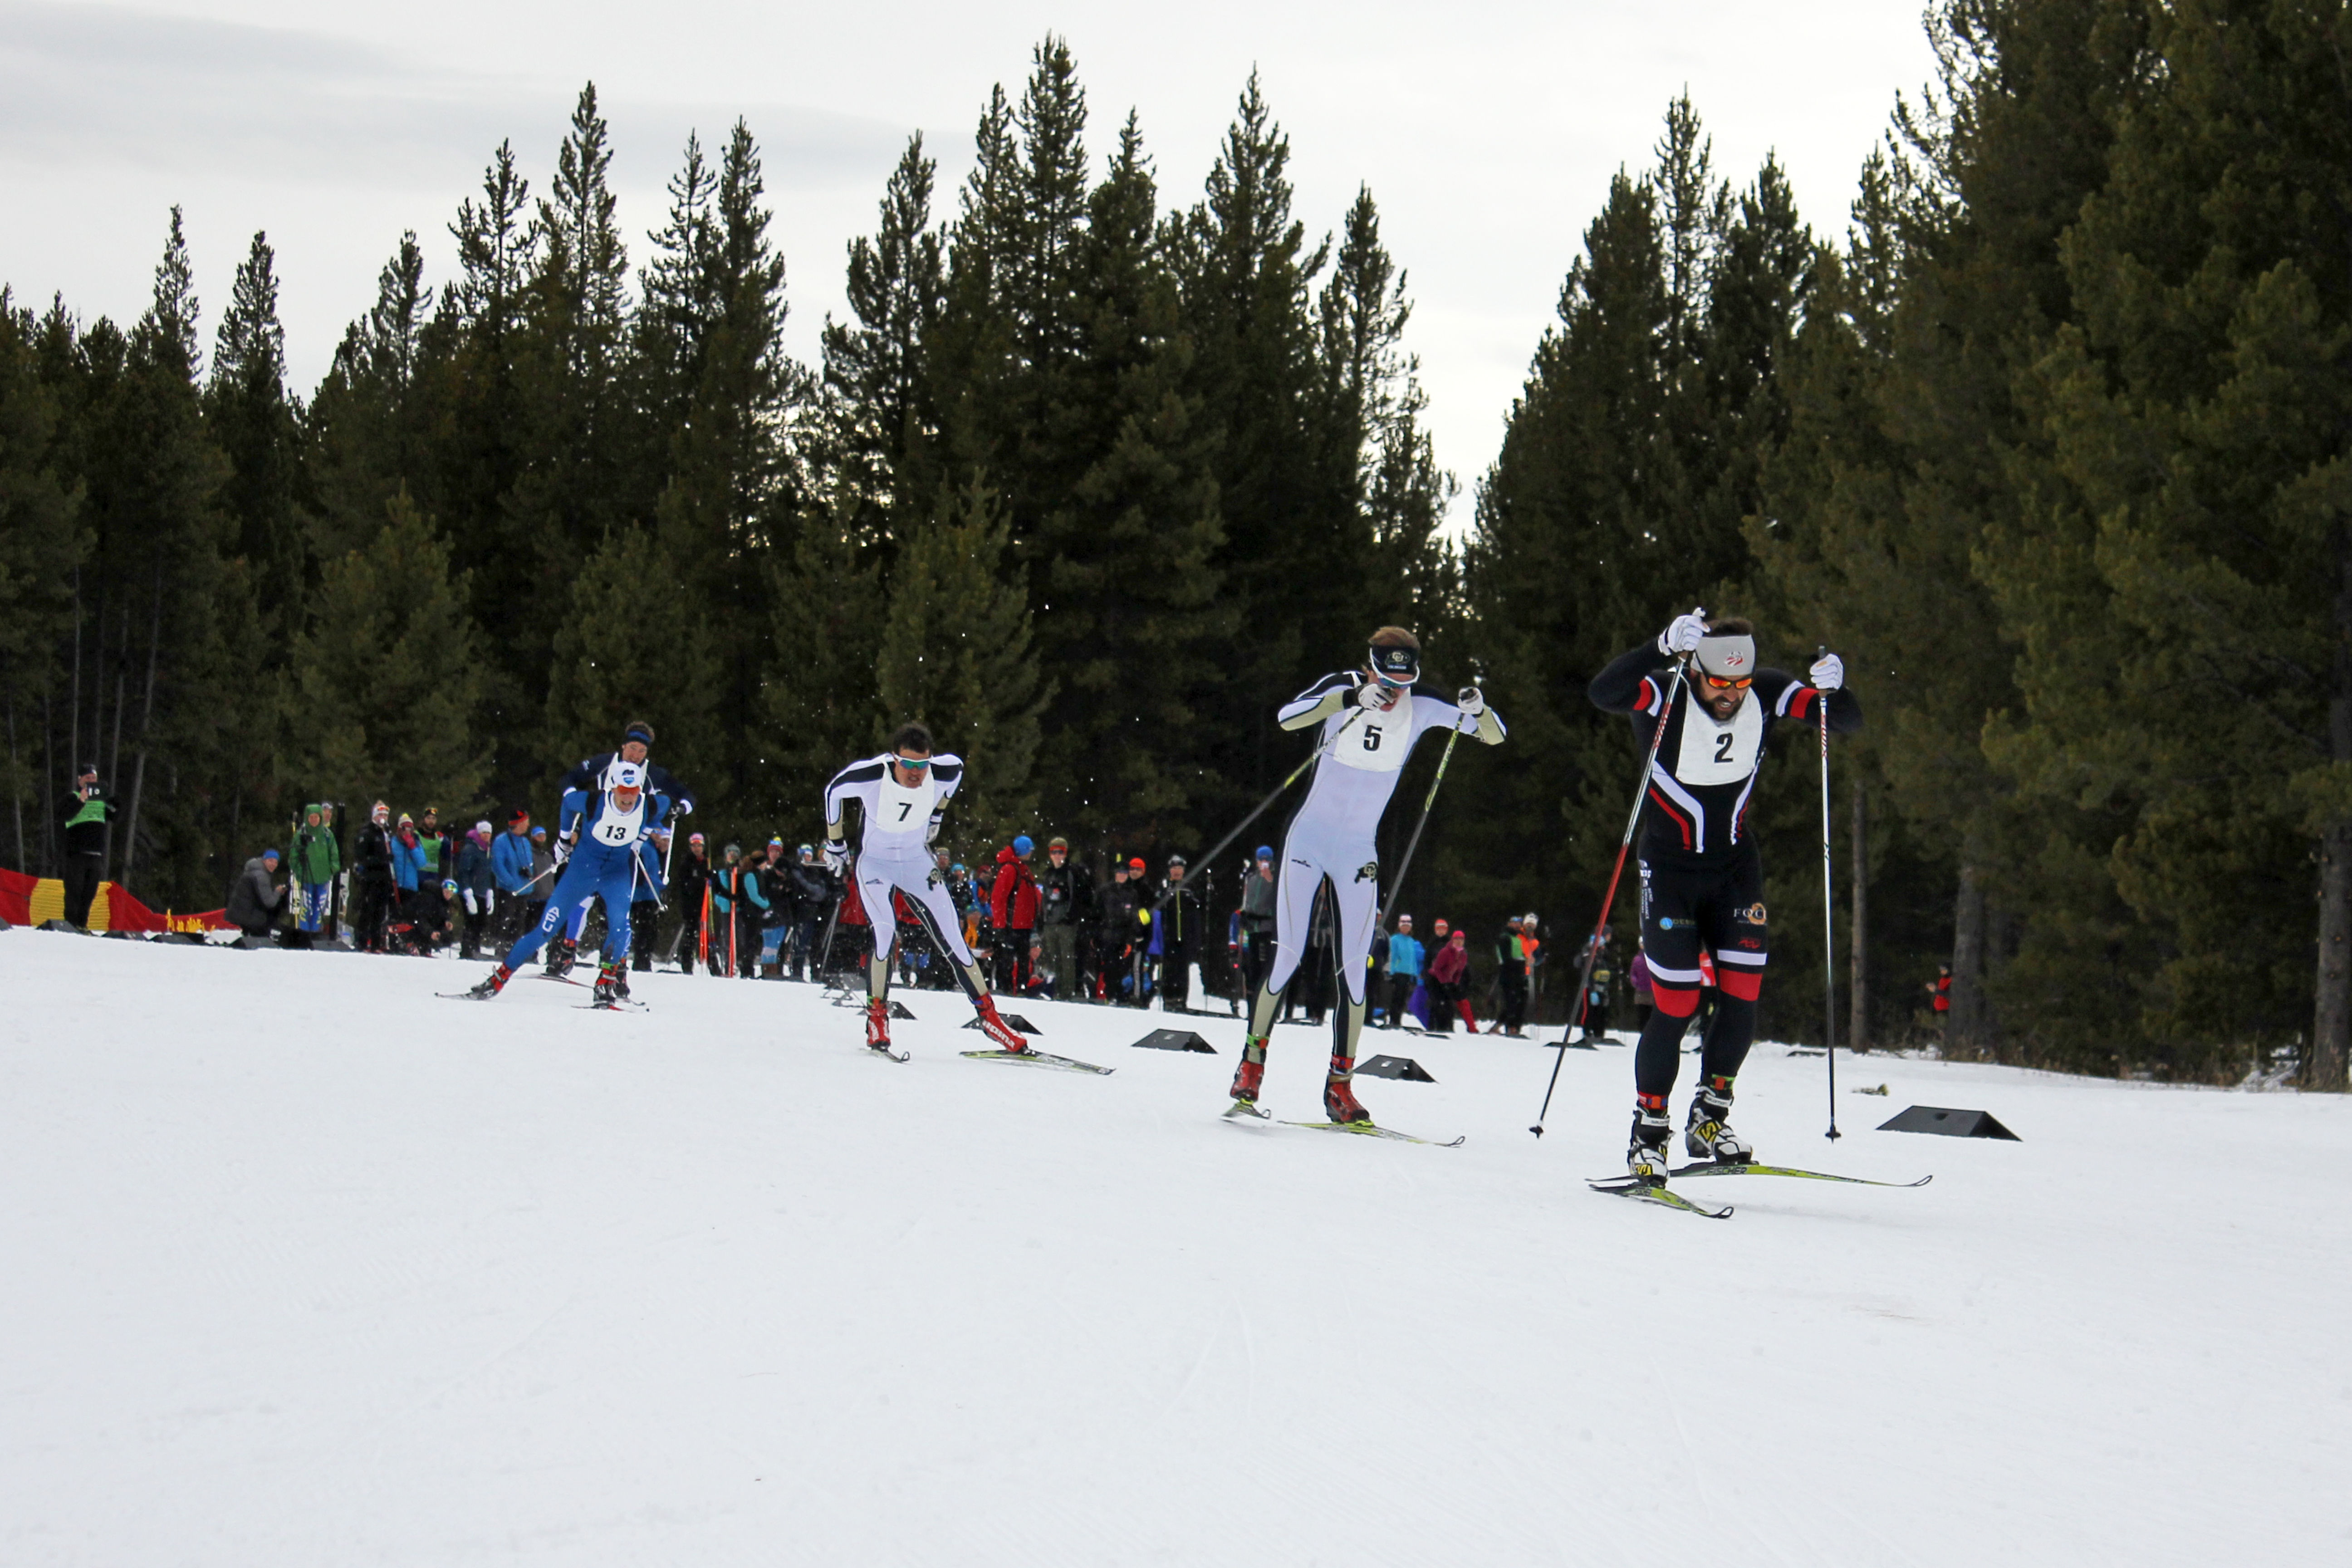 Dakota Blackhorse-von Jess of Bend Endurance Academy (r) leads (from r-l) Mads Stroem (CU), Rune Oedegaard (CU), and Eric Packer (APU) in the A-final of Friday's Super Tour freestyle sprint in West Yellowstone.  